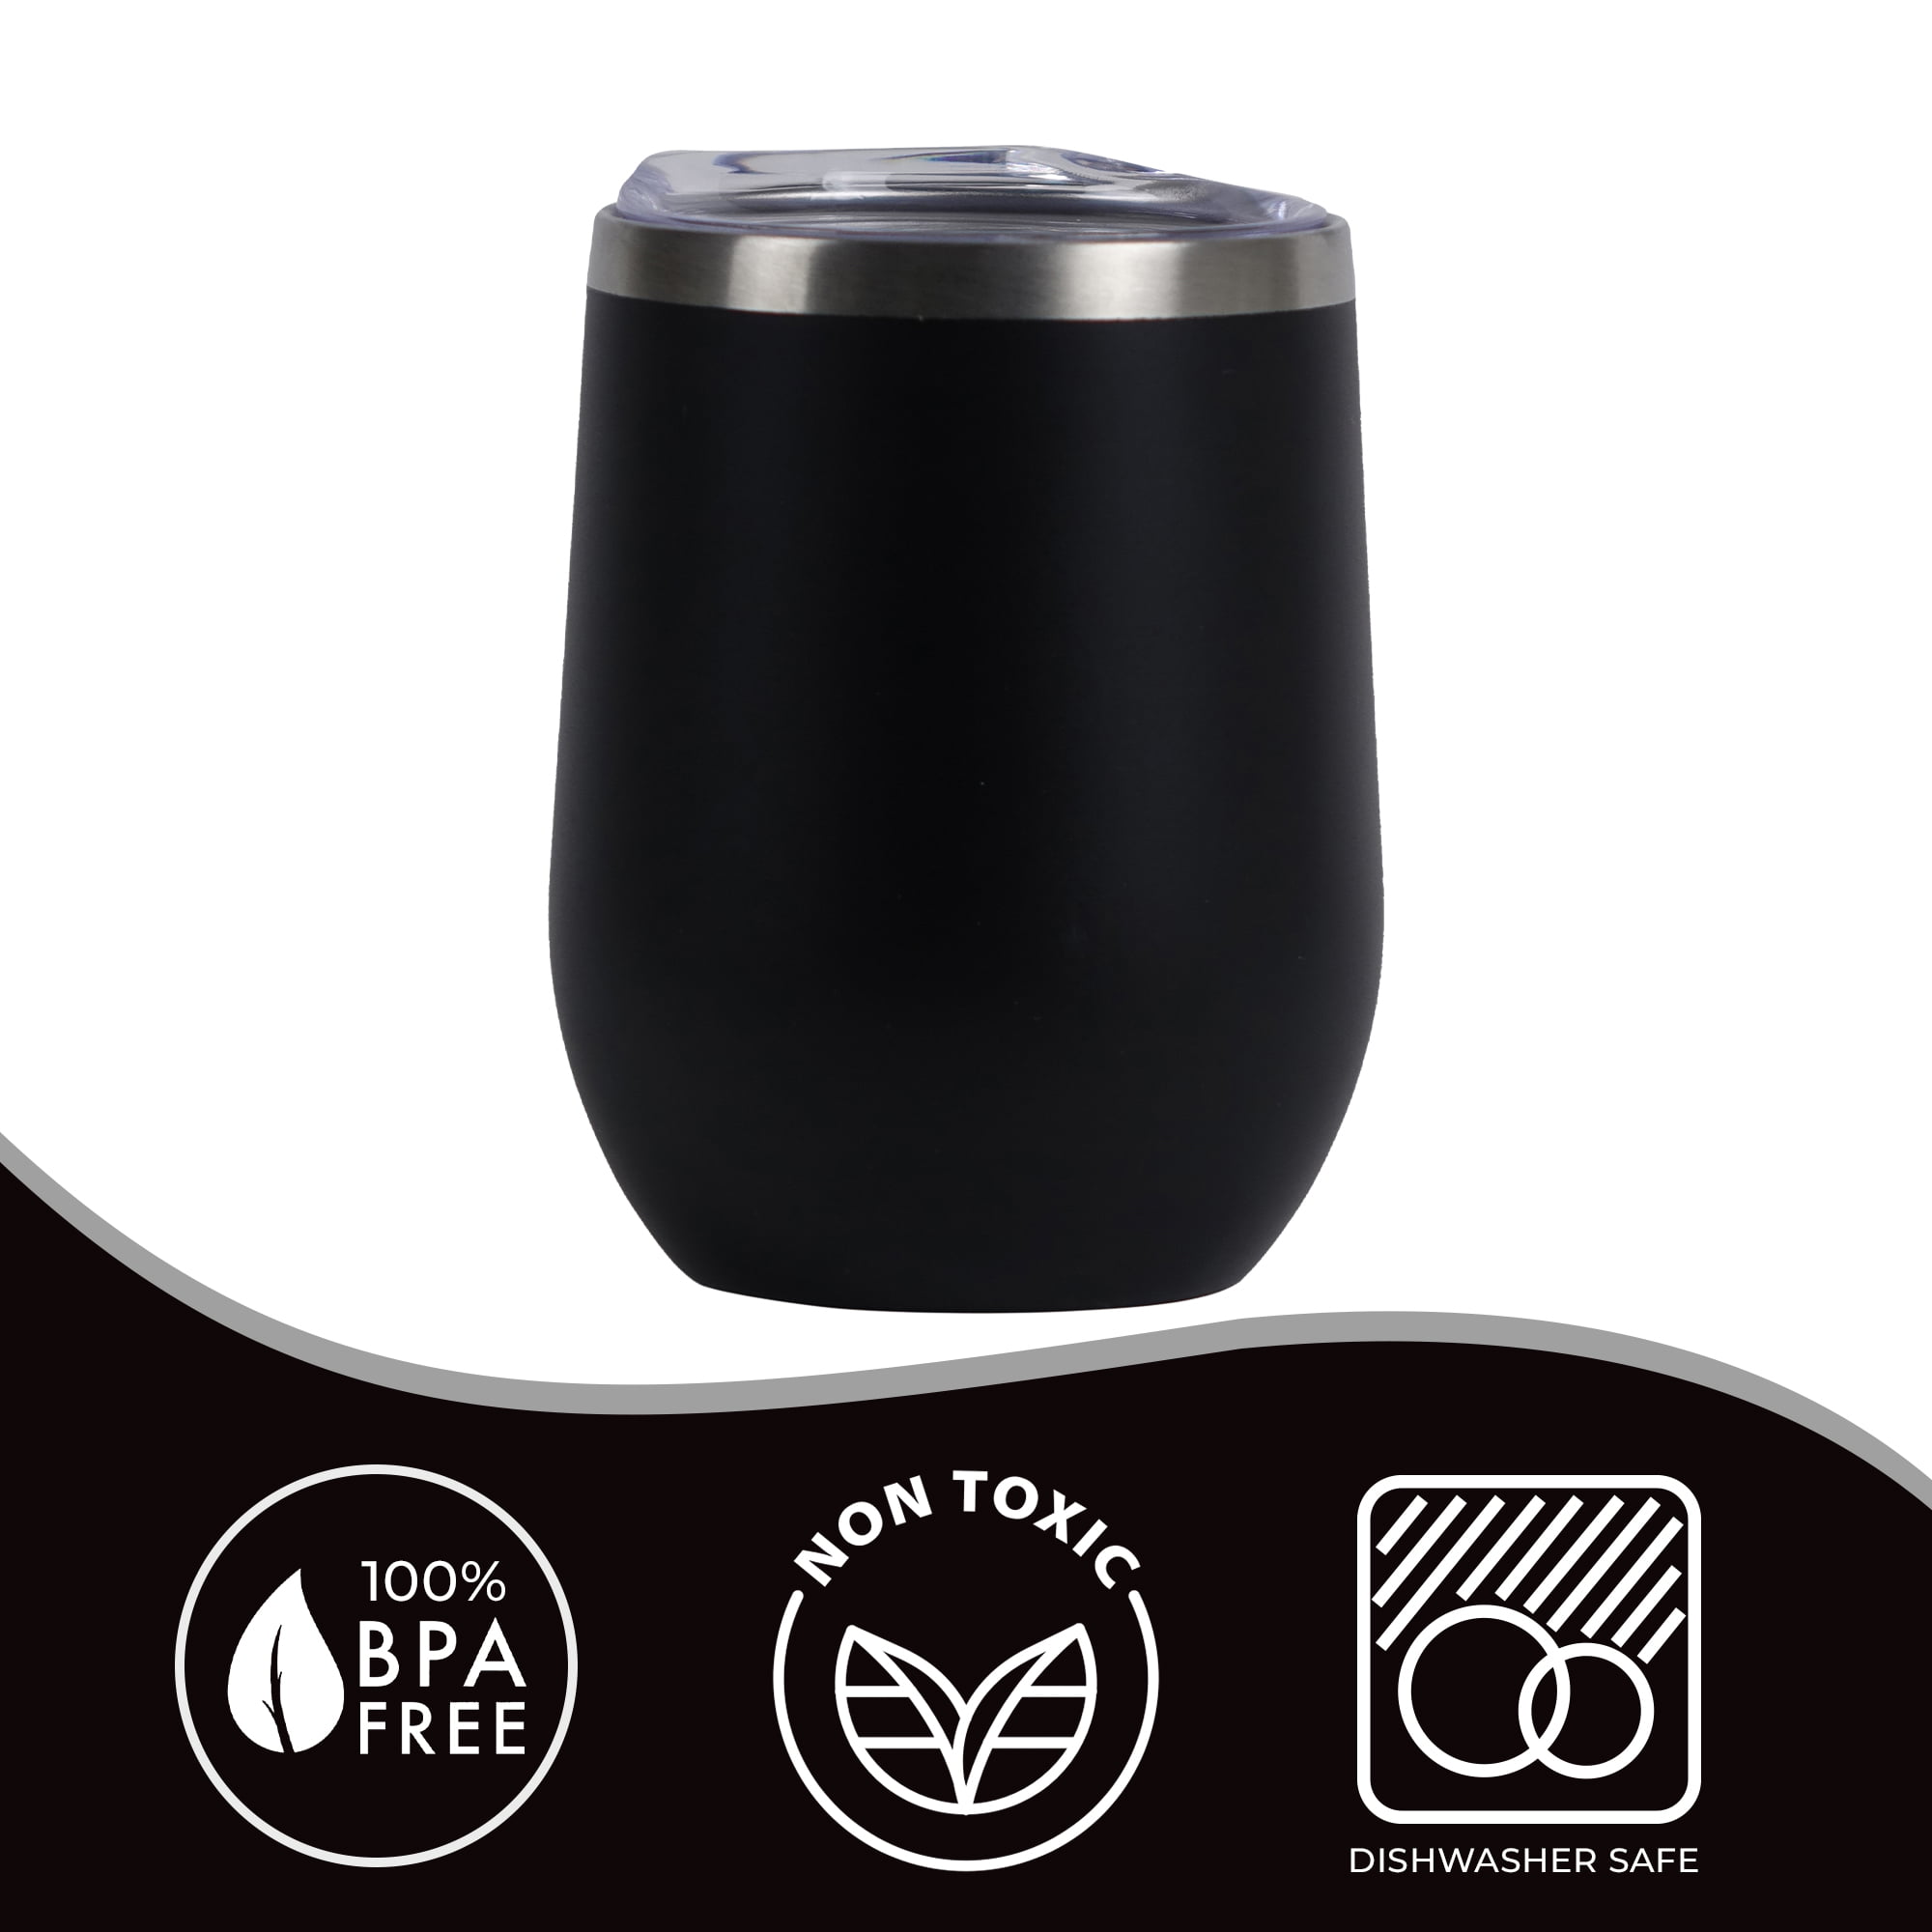 ImpecGear Tumbler for Coffee, Tea & Drinks 18oz, 100% BPA Free 18/8  Stainless-Steel Tumbler, Double Wall Insulation Hot & Cold Travel Mug with  Leak-Proof Lid & Mouth Tip (SUNM4023-Black) 